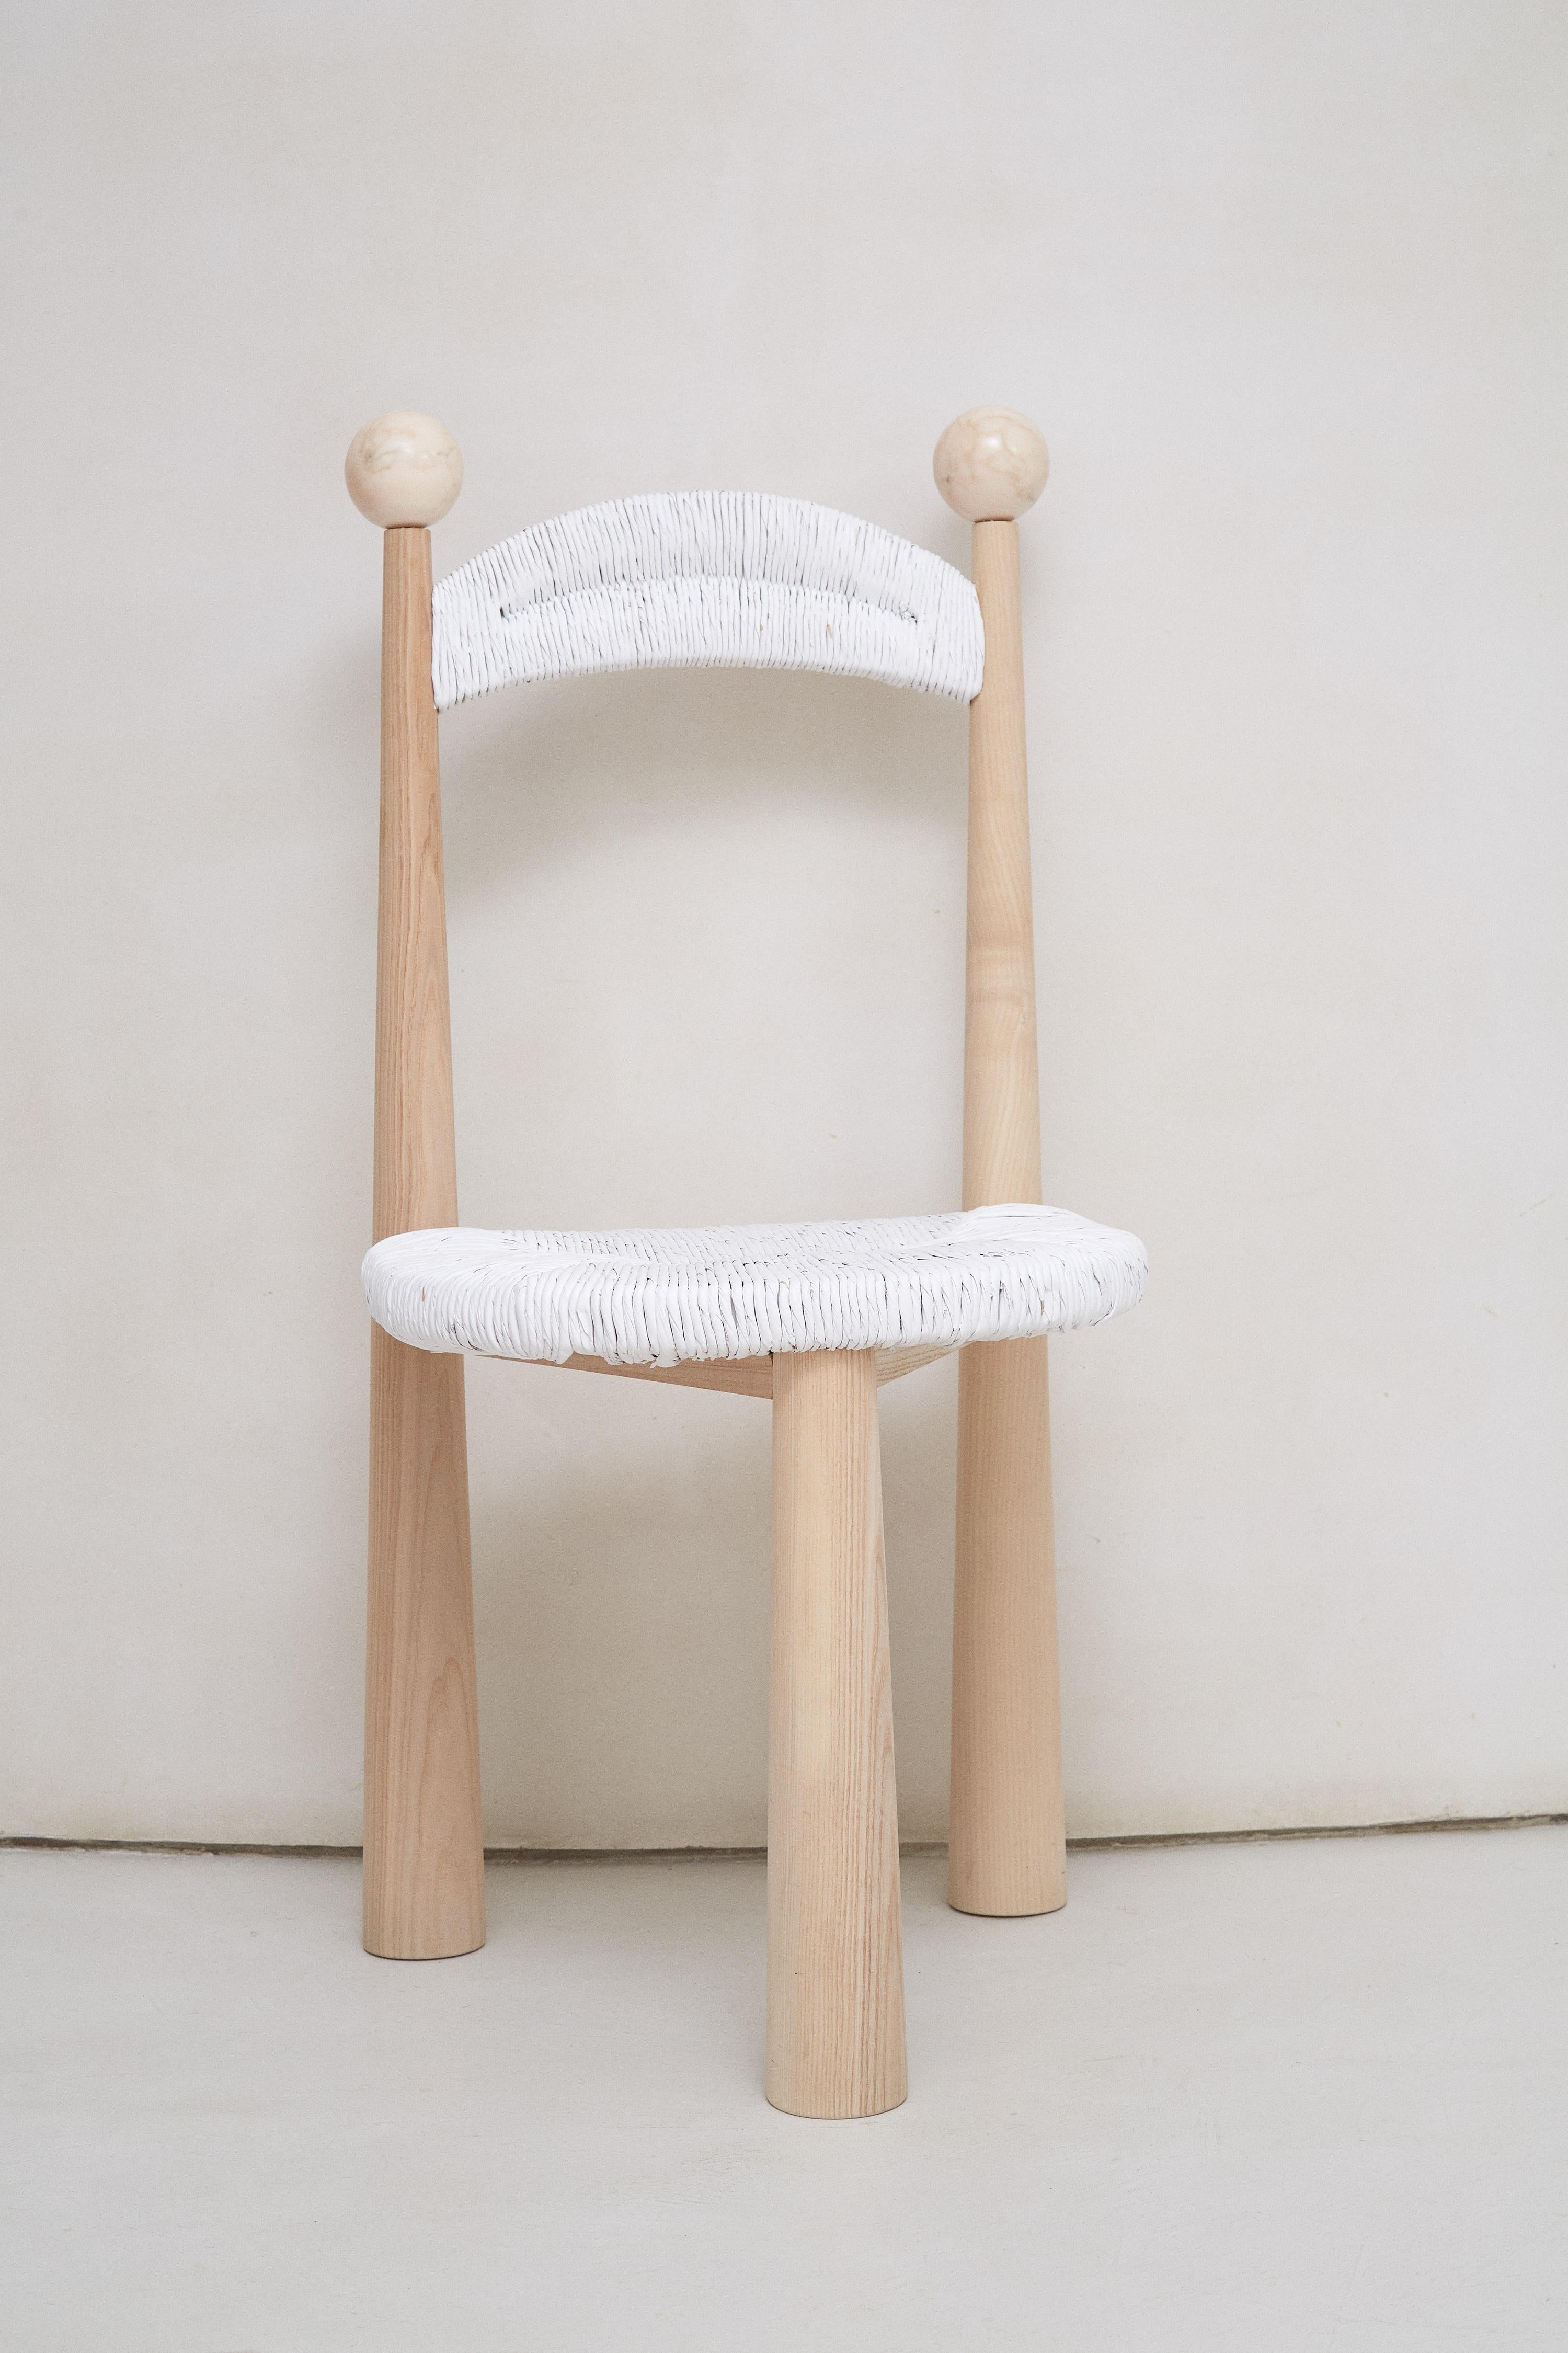 Set Of 2 Newcastle Chairs by Patricia Bustos de la Torre
Dimensions: D 47 x W 48 x H 91 cm.
Materials: Wood and plush.

Newcastle Chair is a three-legged wooden chair with a rattan seat capable of transforming any dining room. This perfect balance